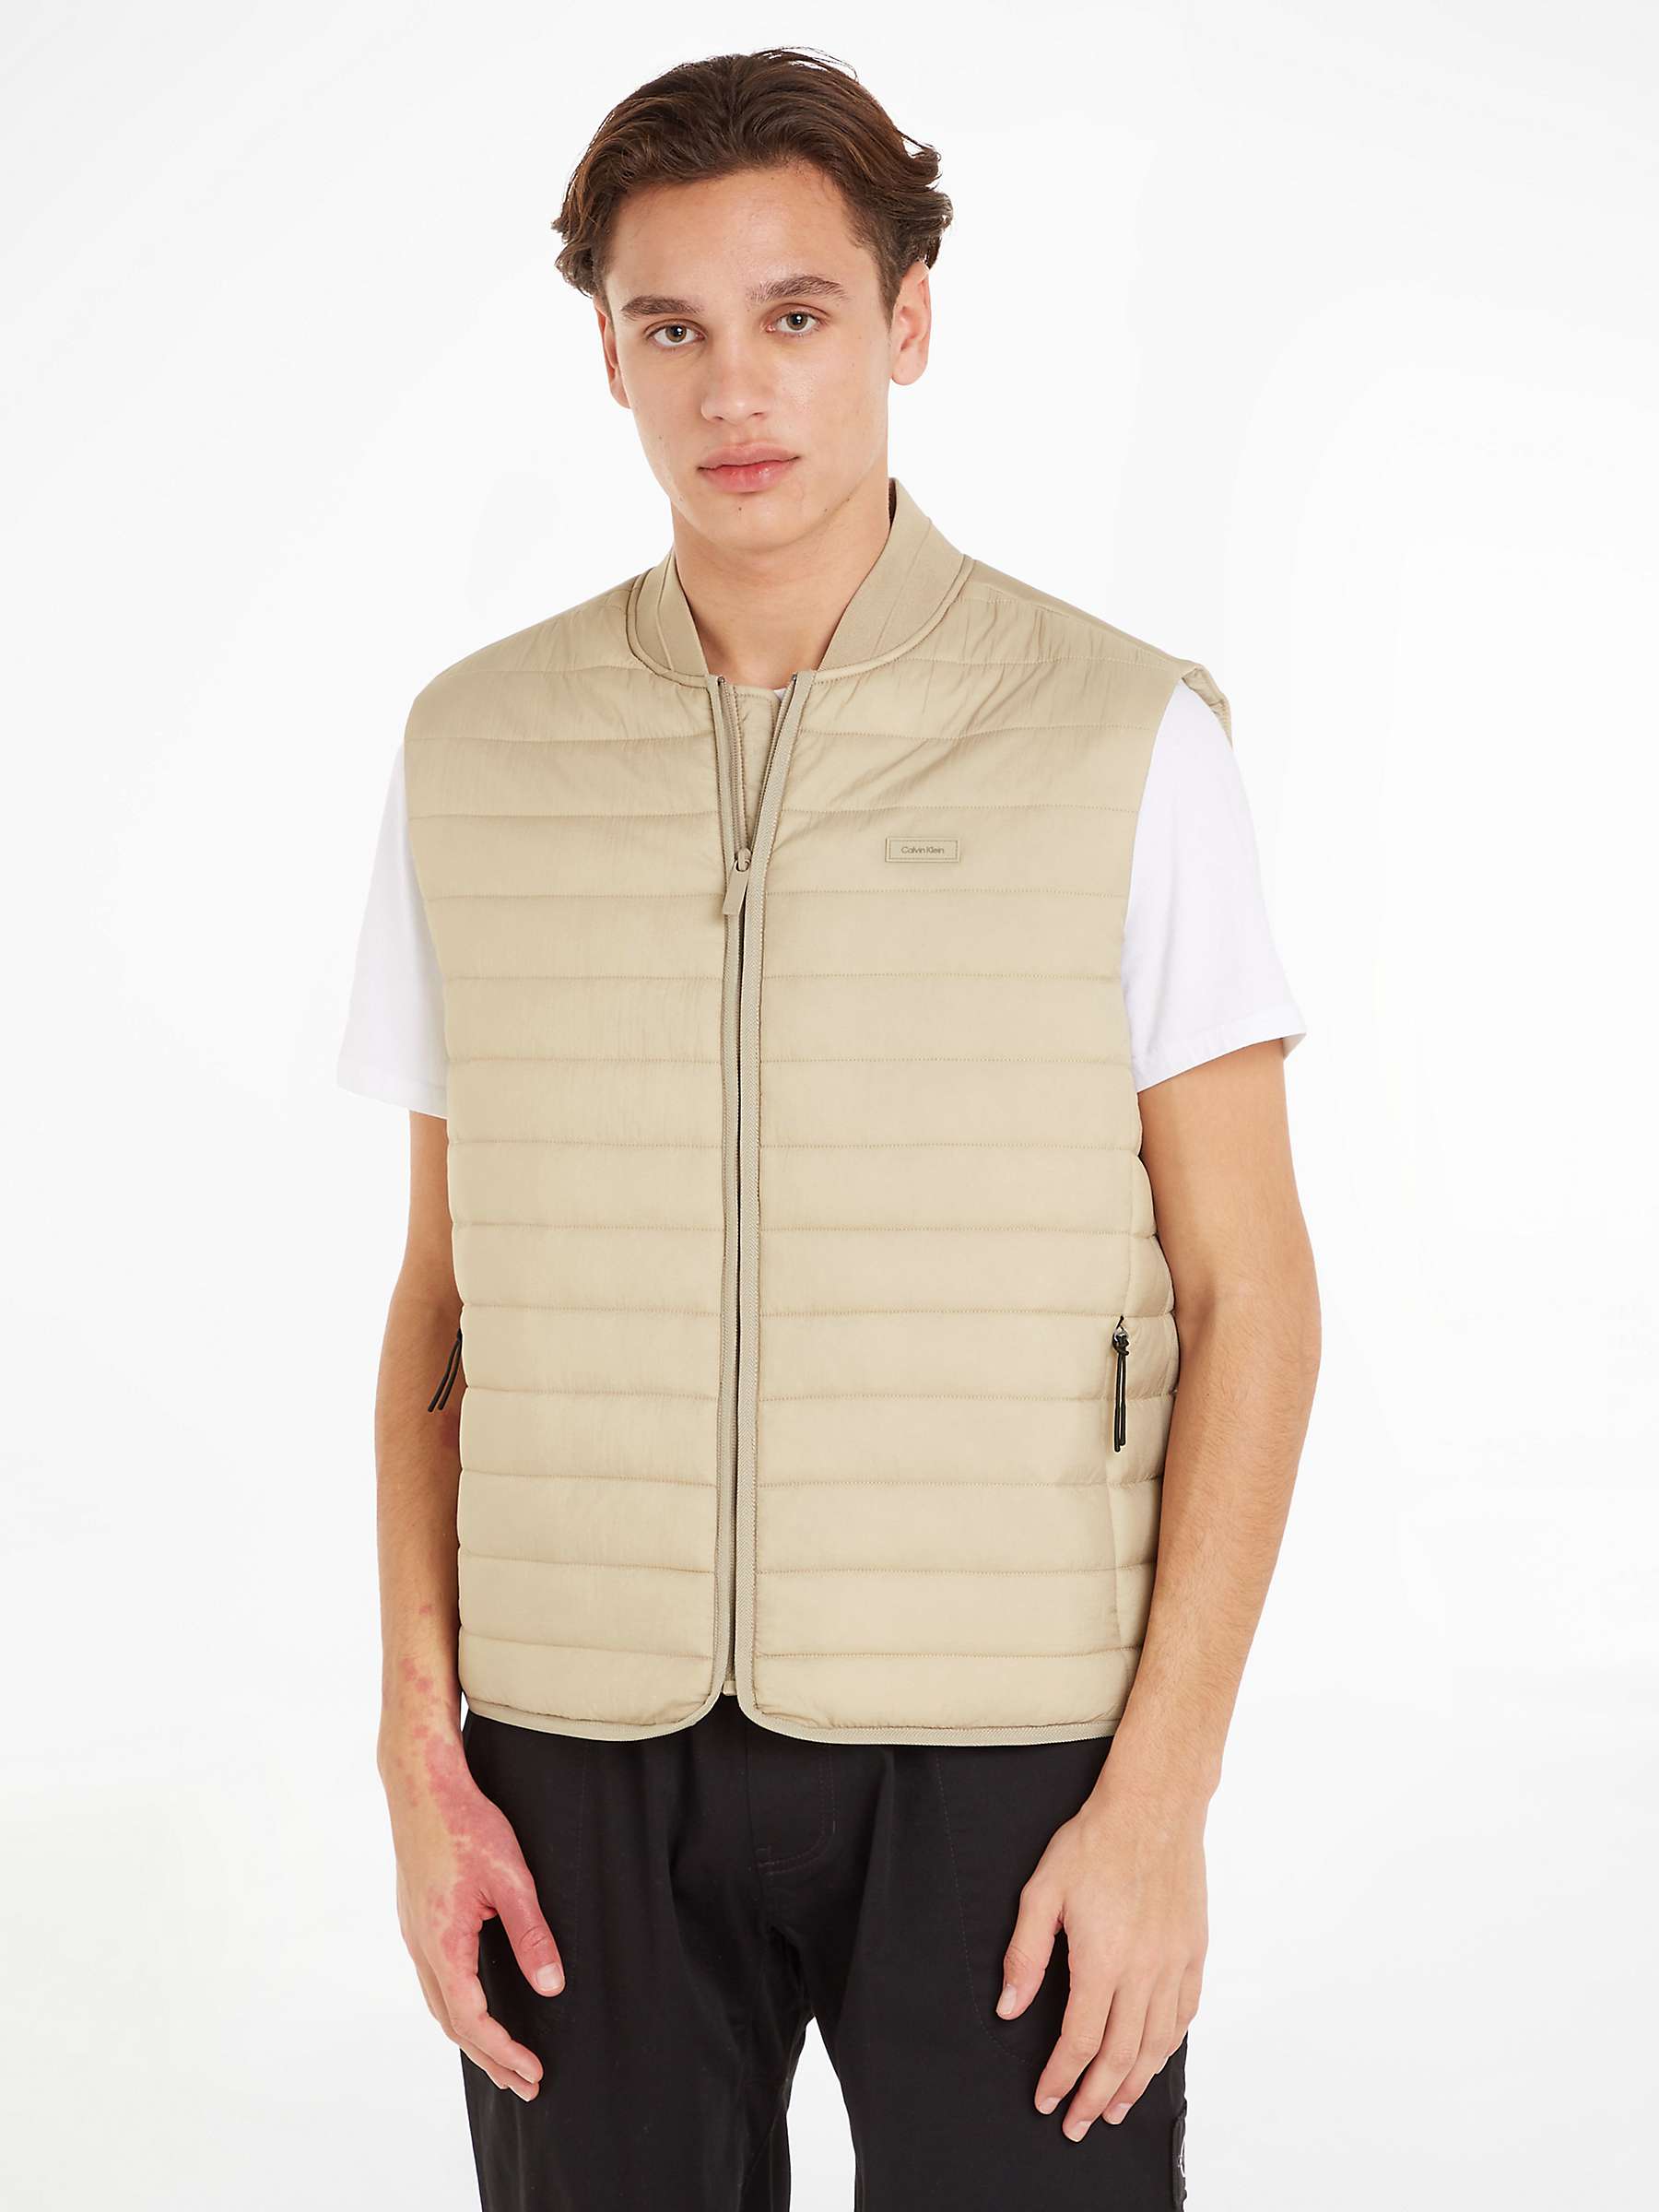 Calvin Klein Crinkle Quilted Gilet, Clay at John Lewis & Partners